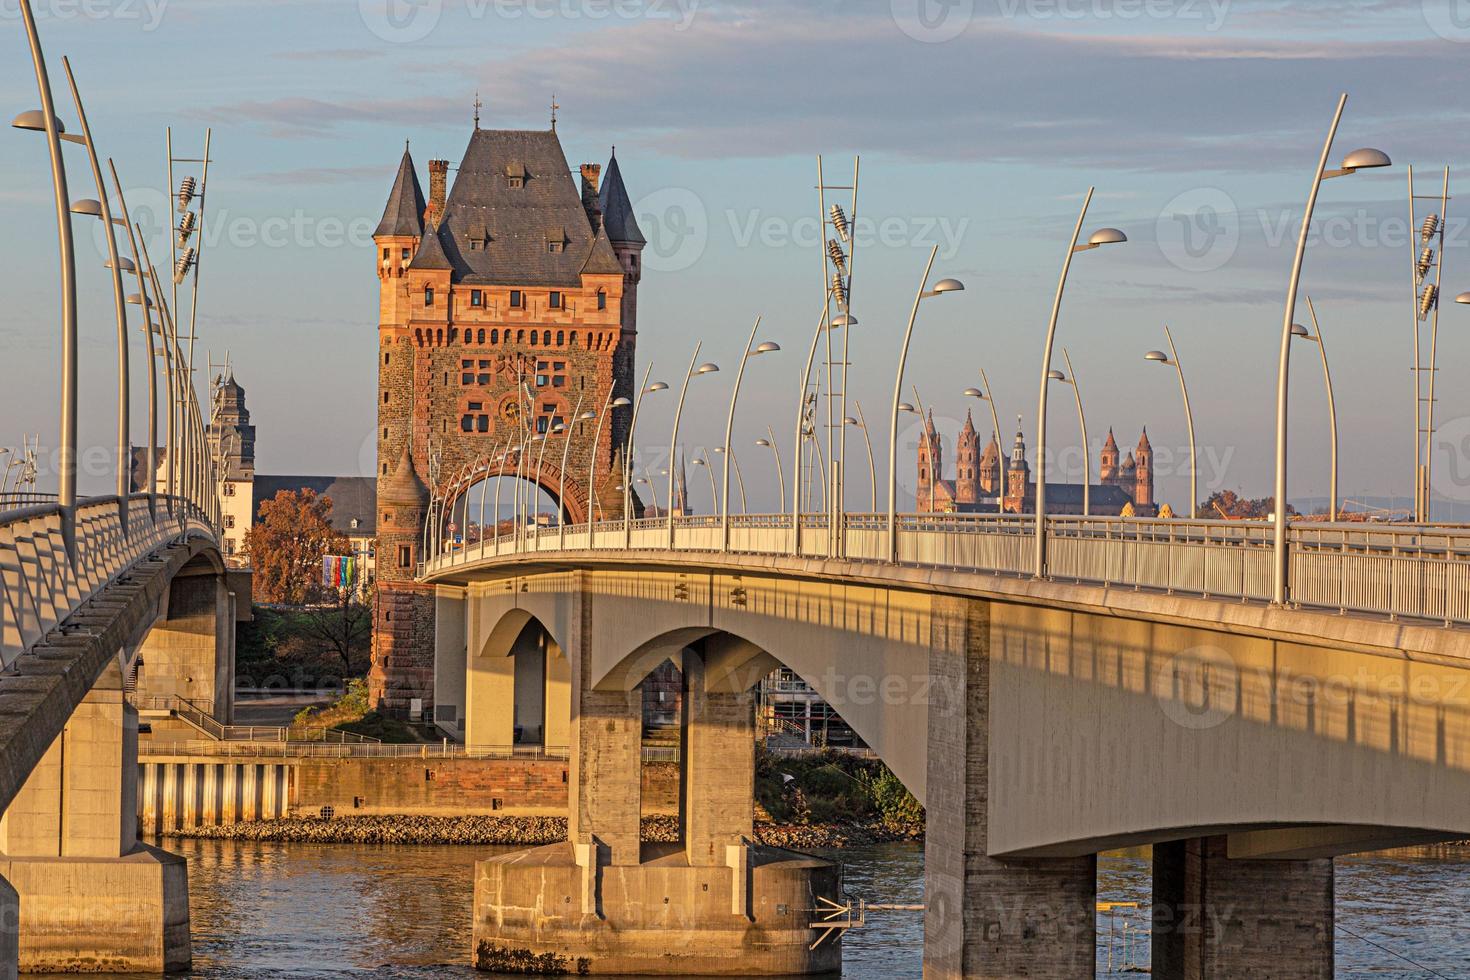 View of the Nibelungen Tower and Nibelungen Bridge in Worms without traffic and people photo